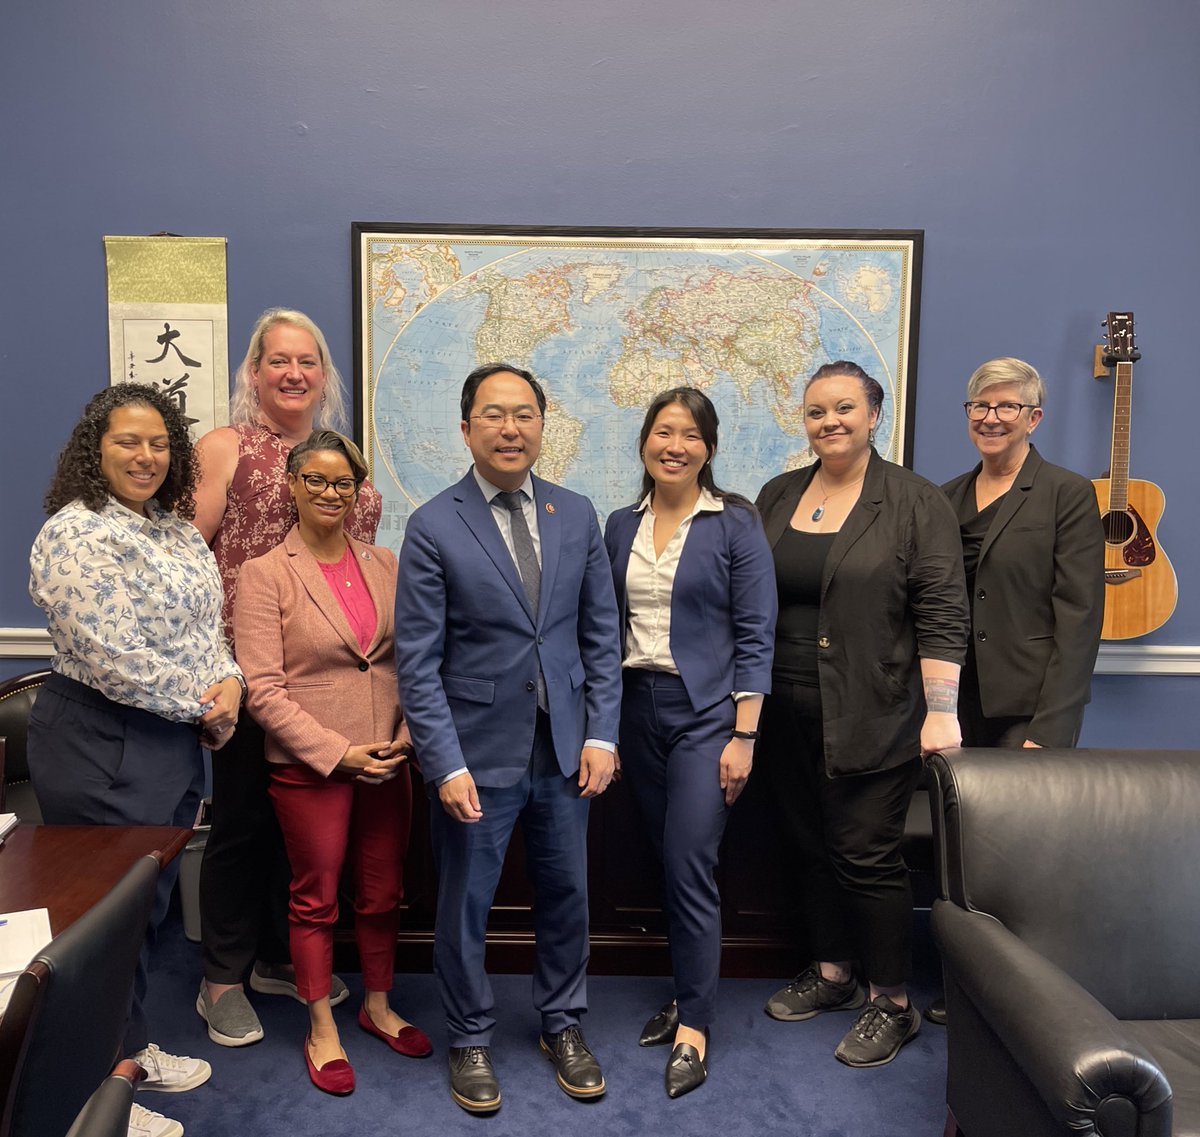 Fantastic meeting w/ @RepAndyKimNJ discussing the aims of the Military Reform Coalition for finally #EndingMST through smart policy solutions for @DeptofDefense & @DeptVetAffairs—the fight is far from over! #SAAPM